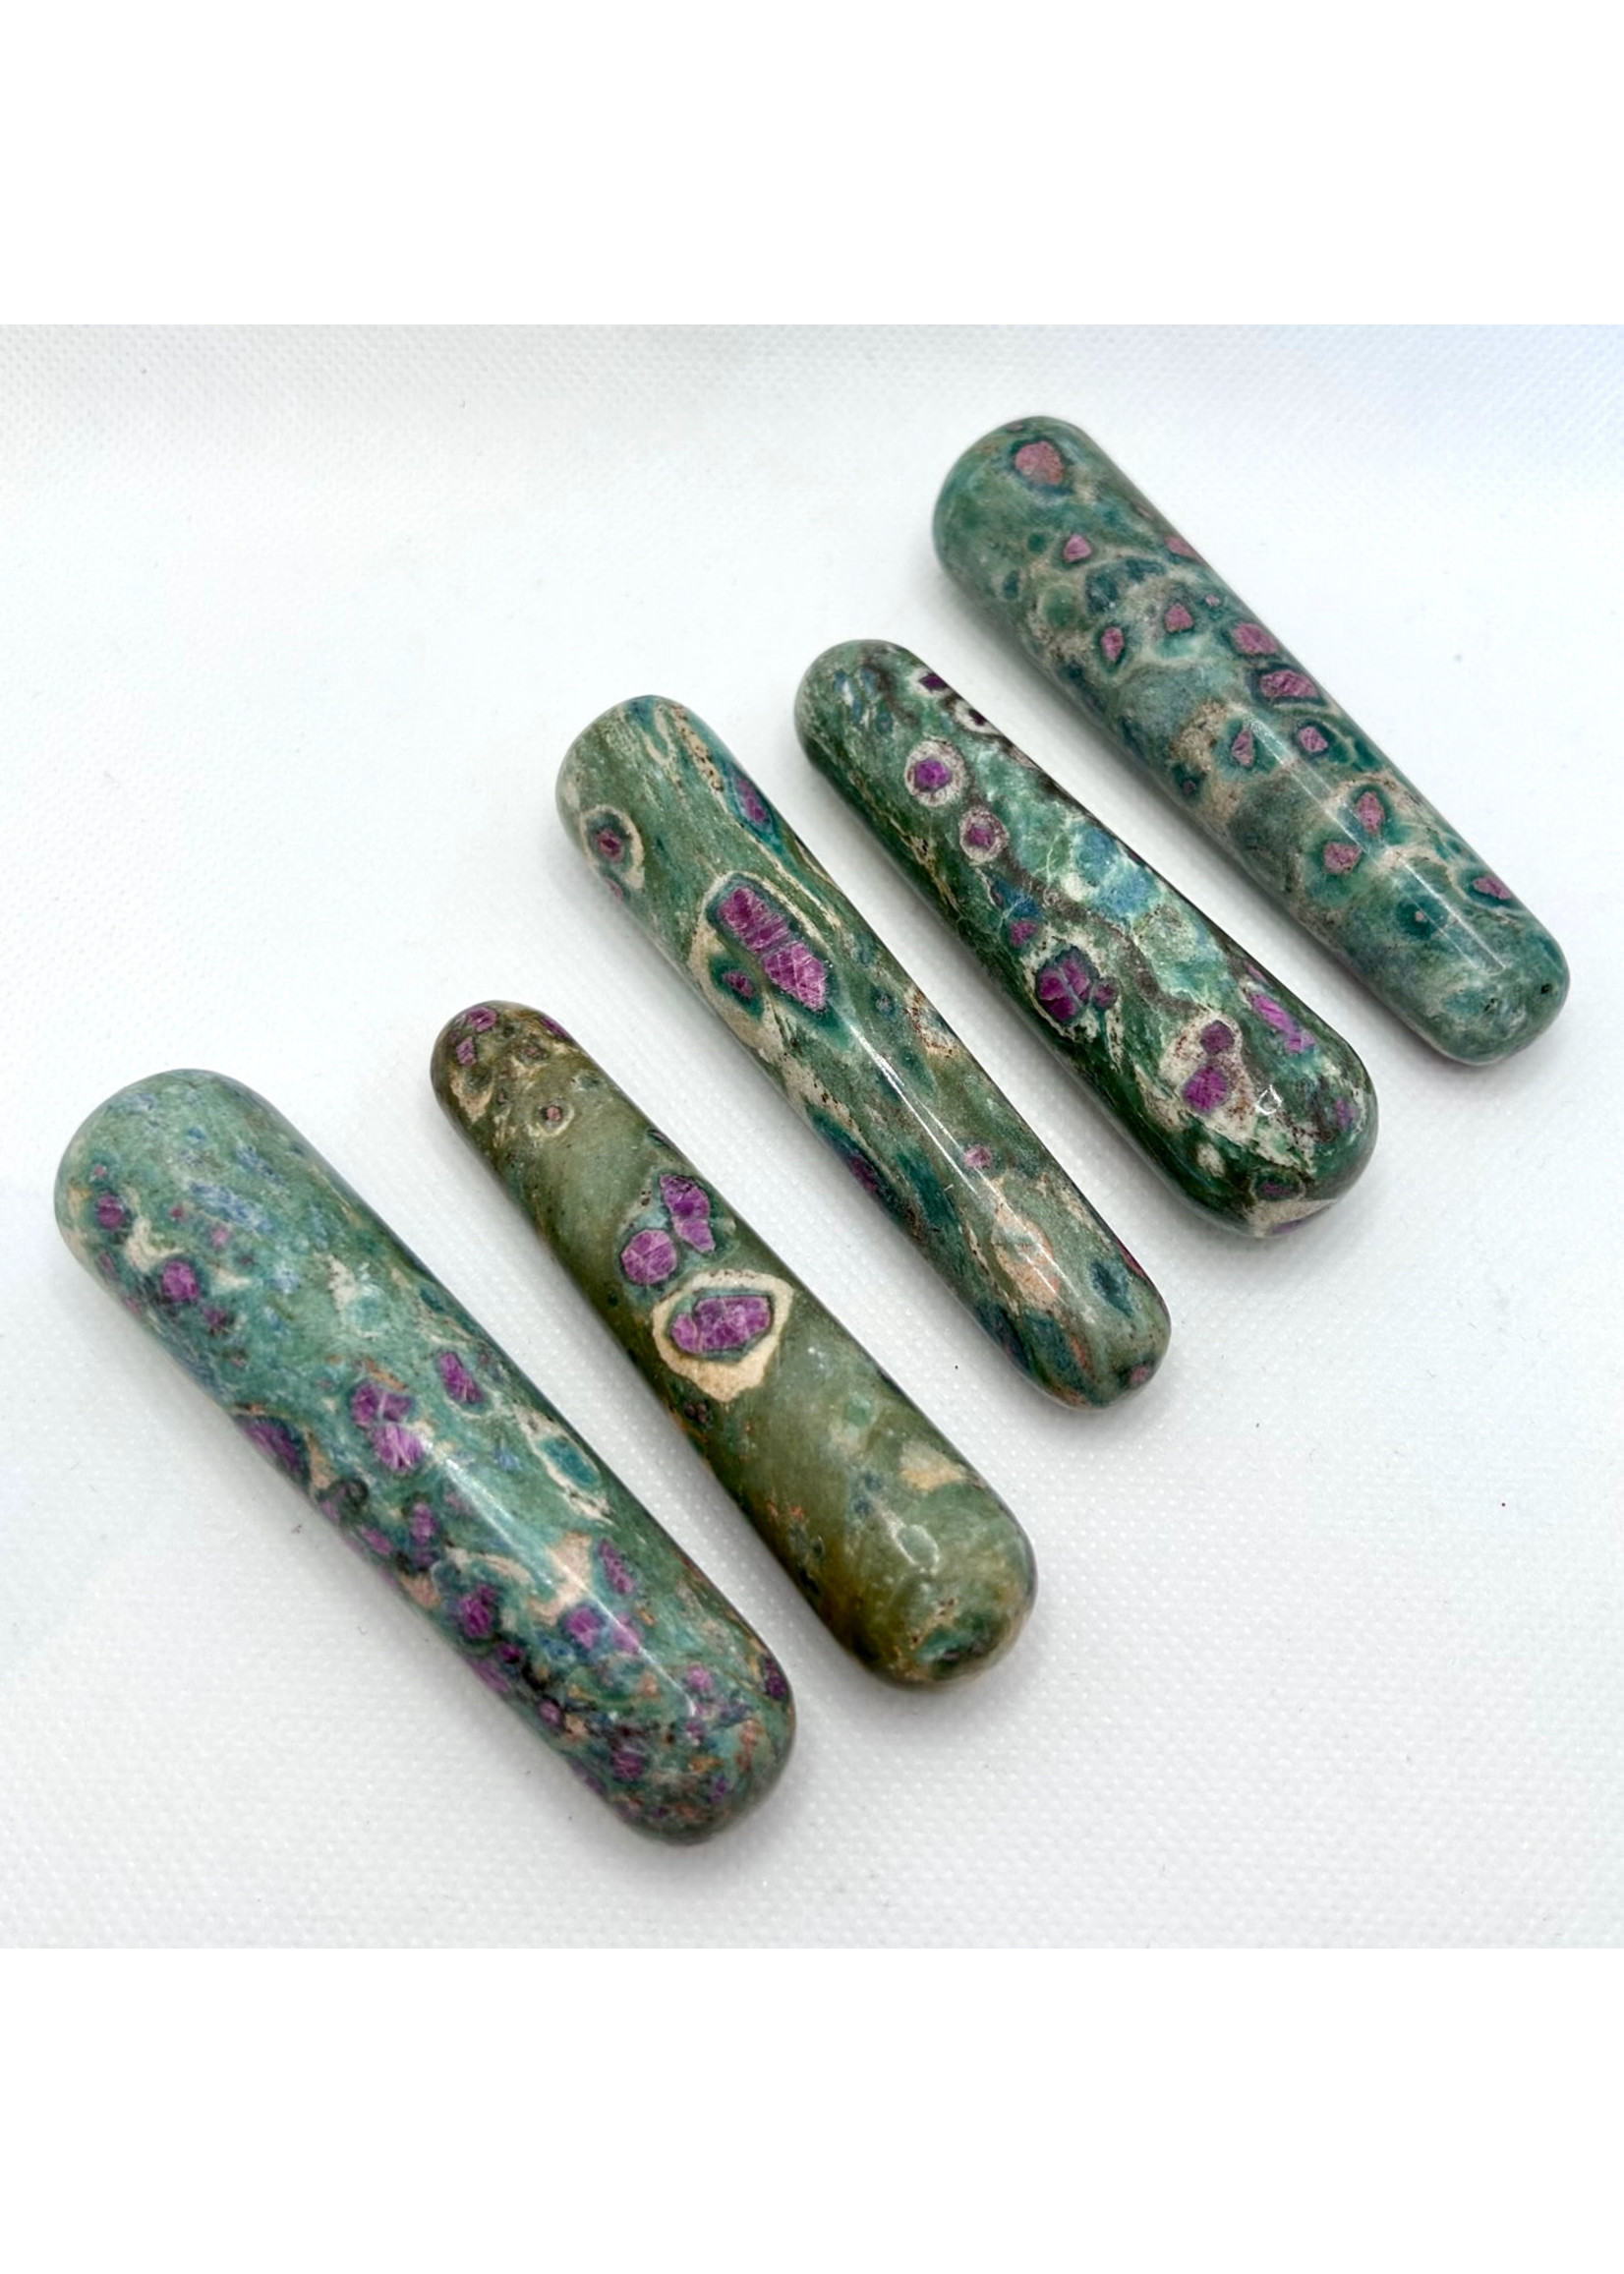 Ruby Fuchsite Wands for passion and life force energy